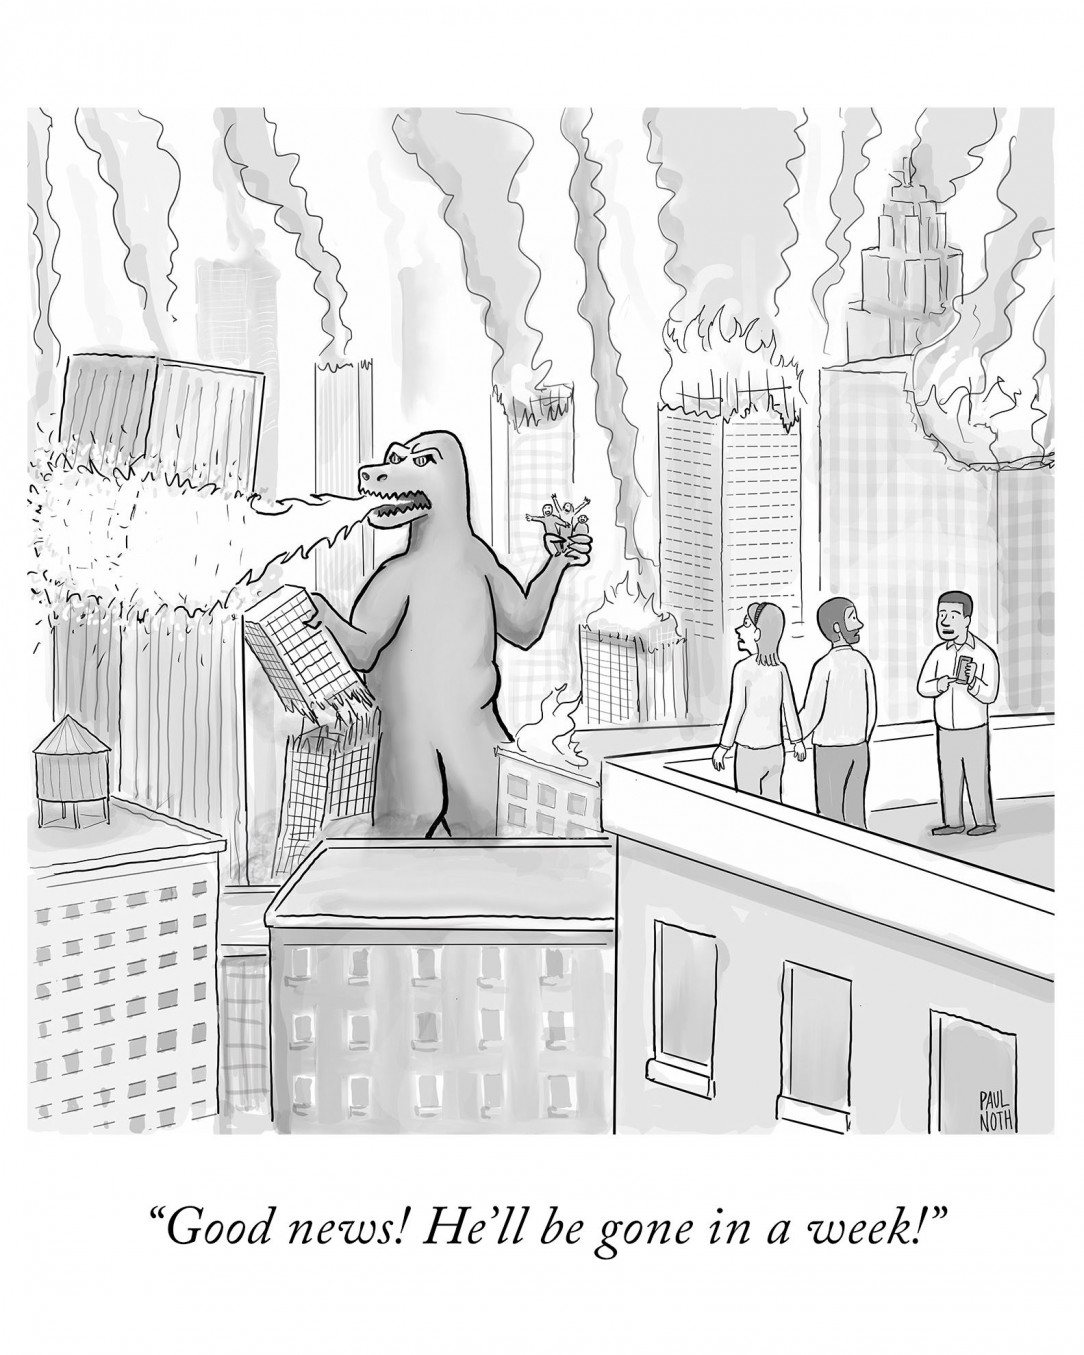 from the New Yorker, was interesting